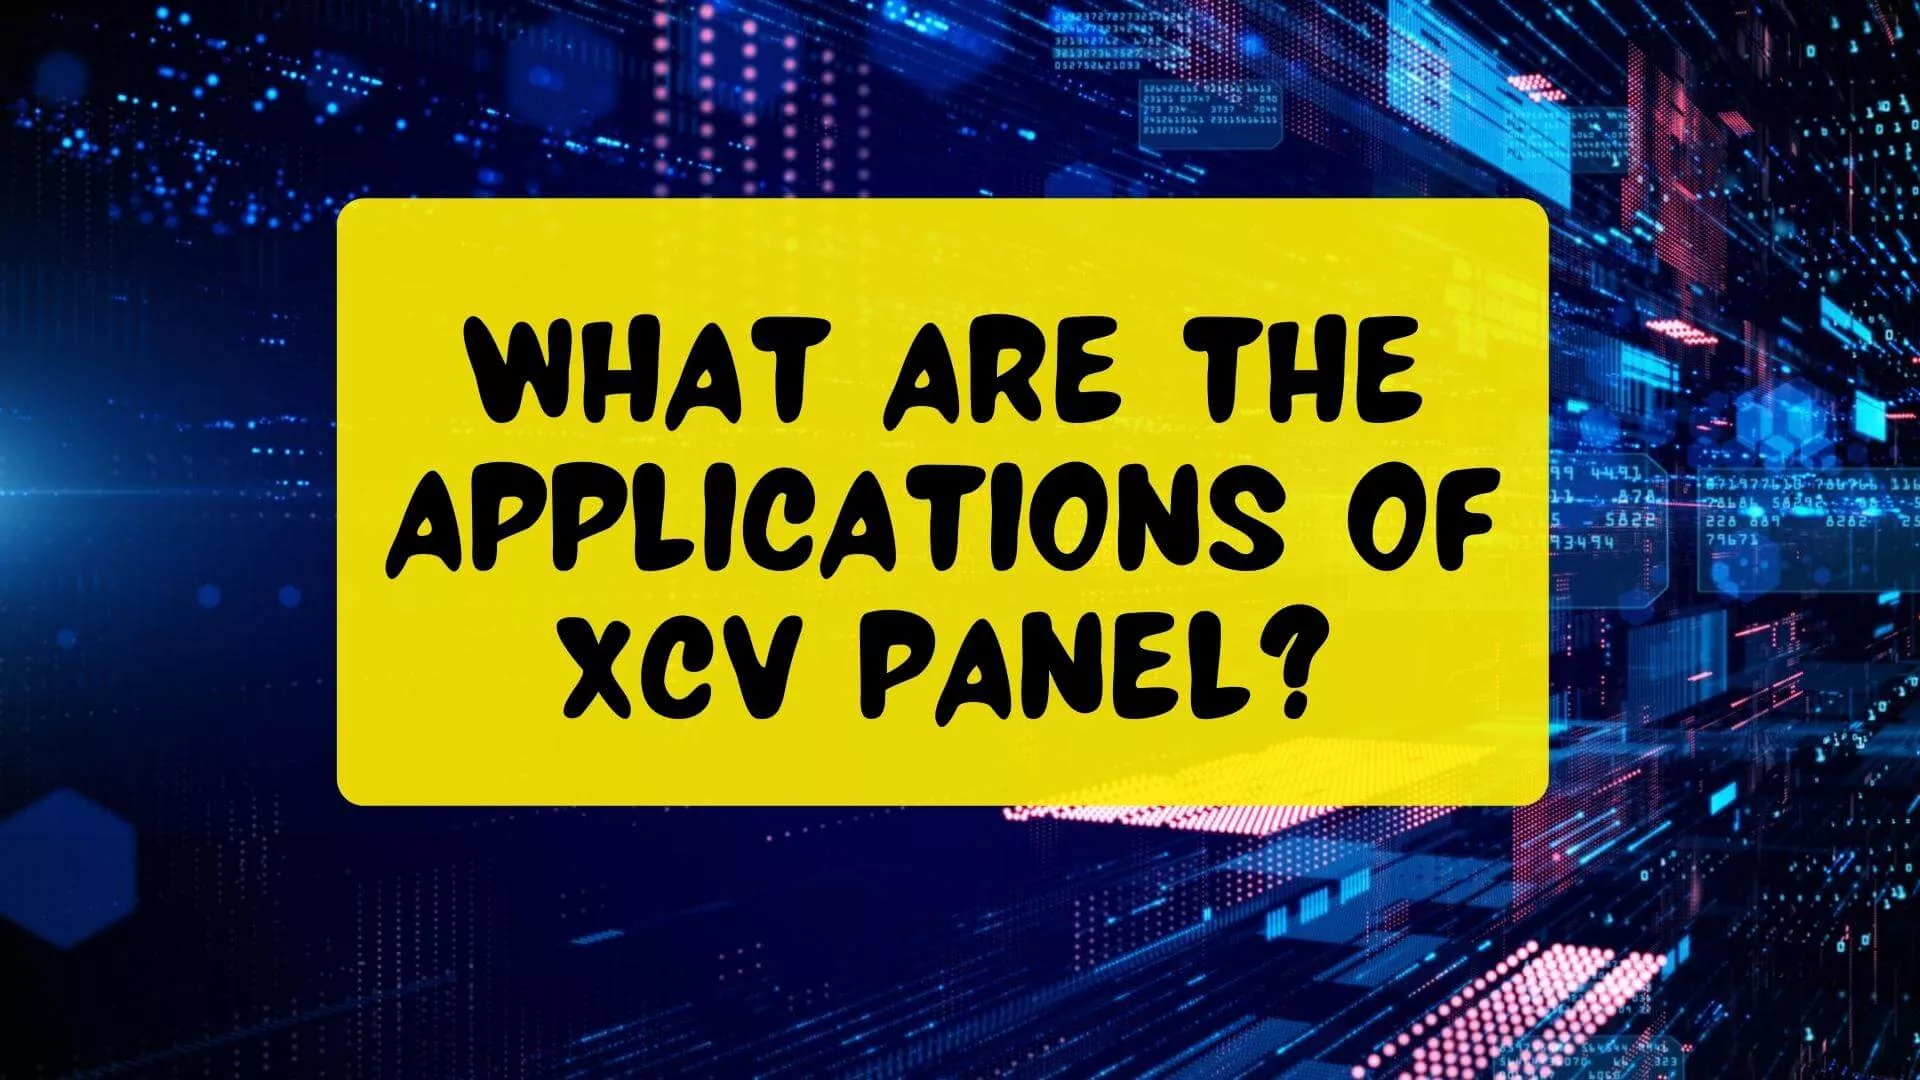 What are the Applications of XCV Panel?